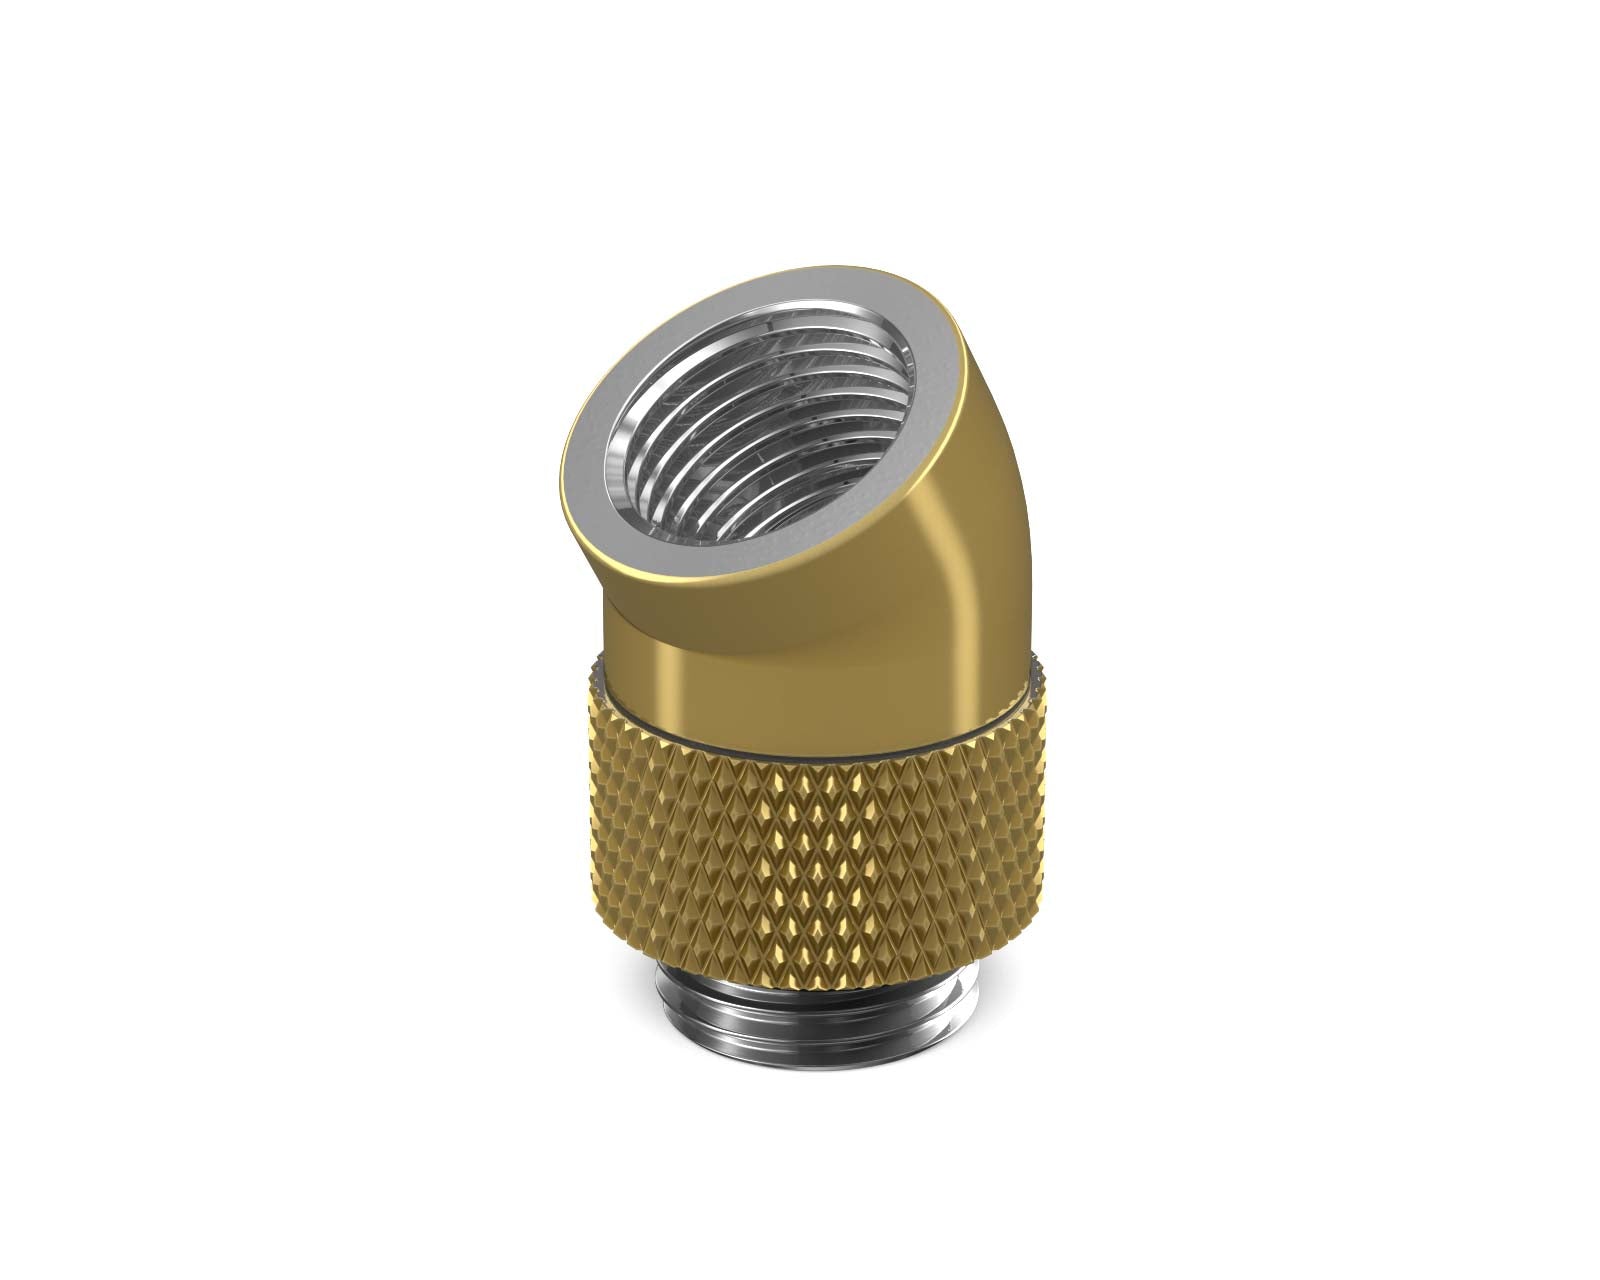 PrimoChill Male to Female G 1/4in. 30 Degree SX Rotary Elbow Fitting - PrimoChill - KEEPING IT COOL Candy Gold